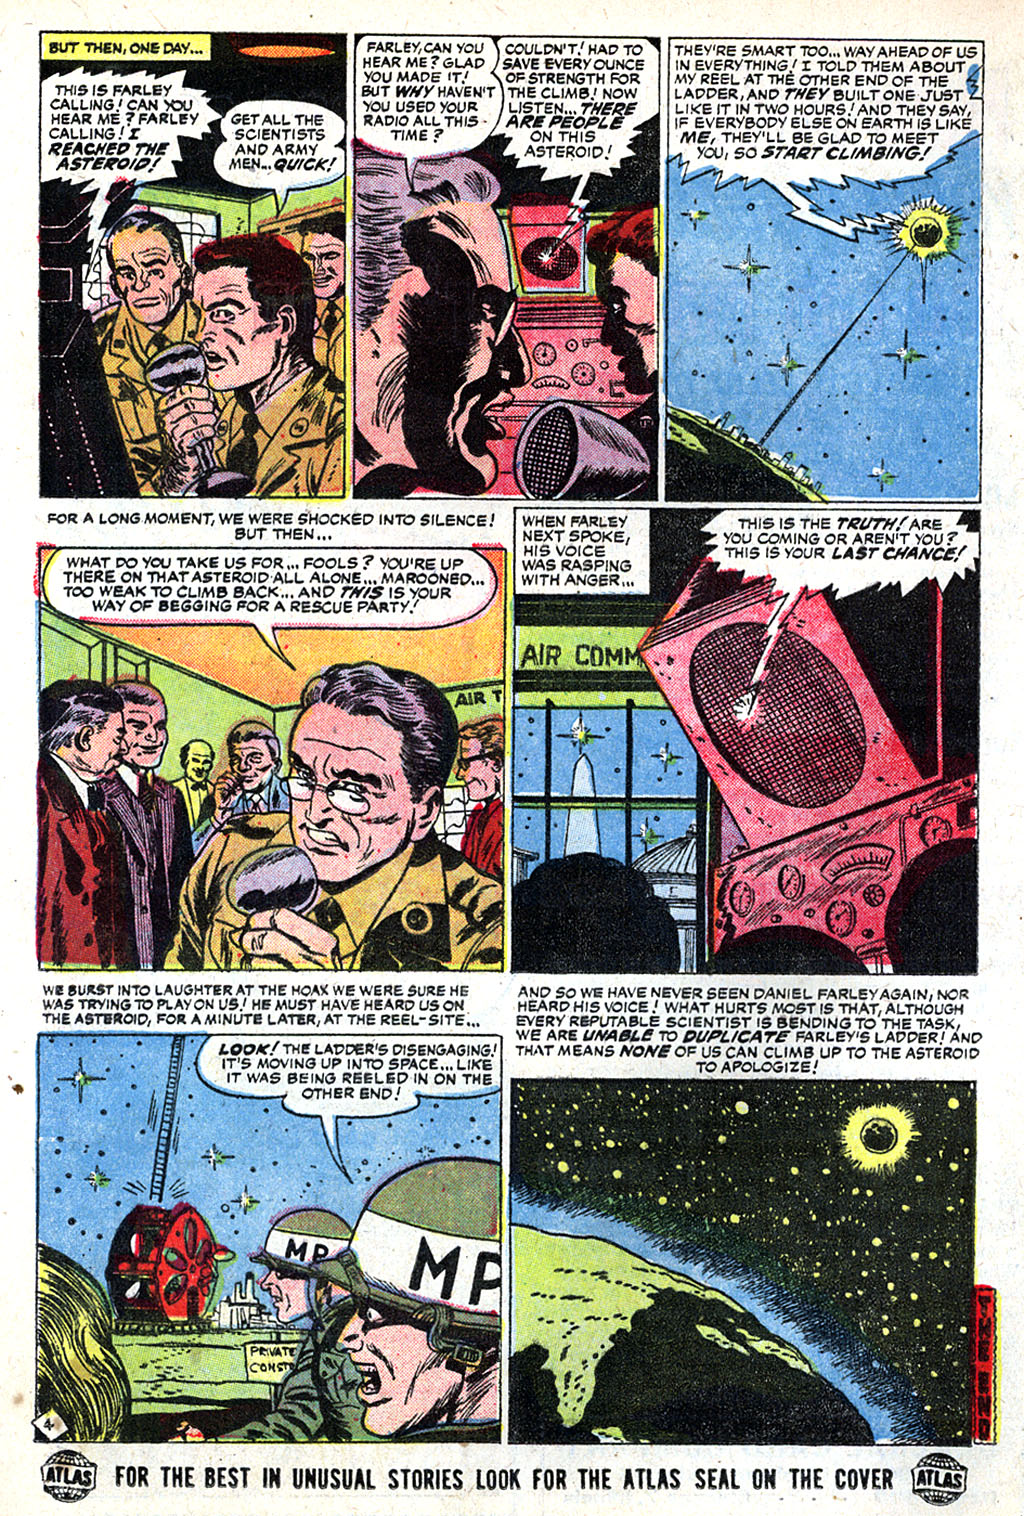 Marvel Tales (1949) 138 Page 11